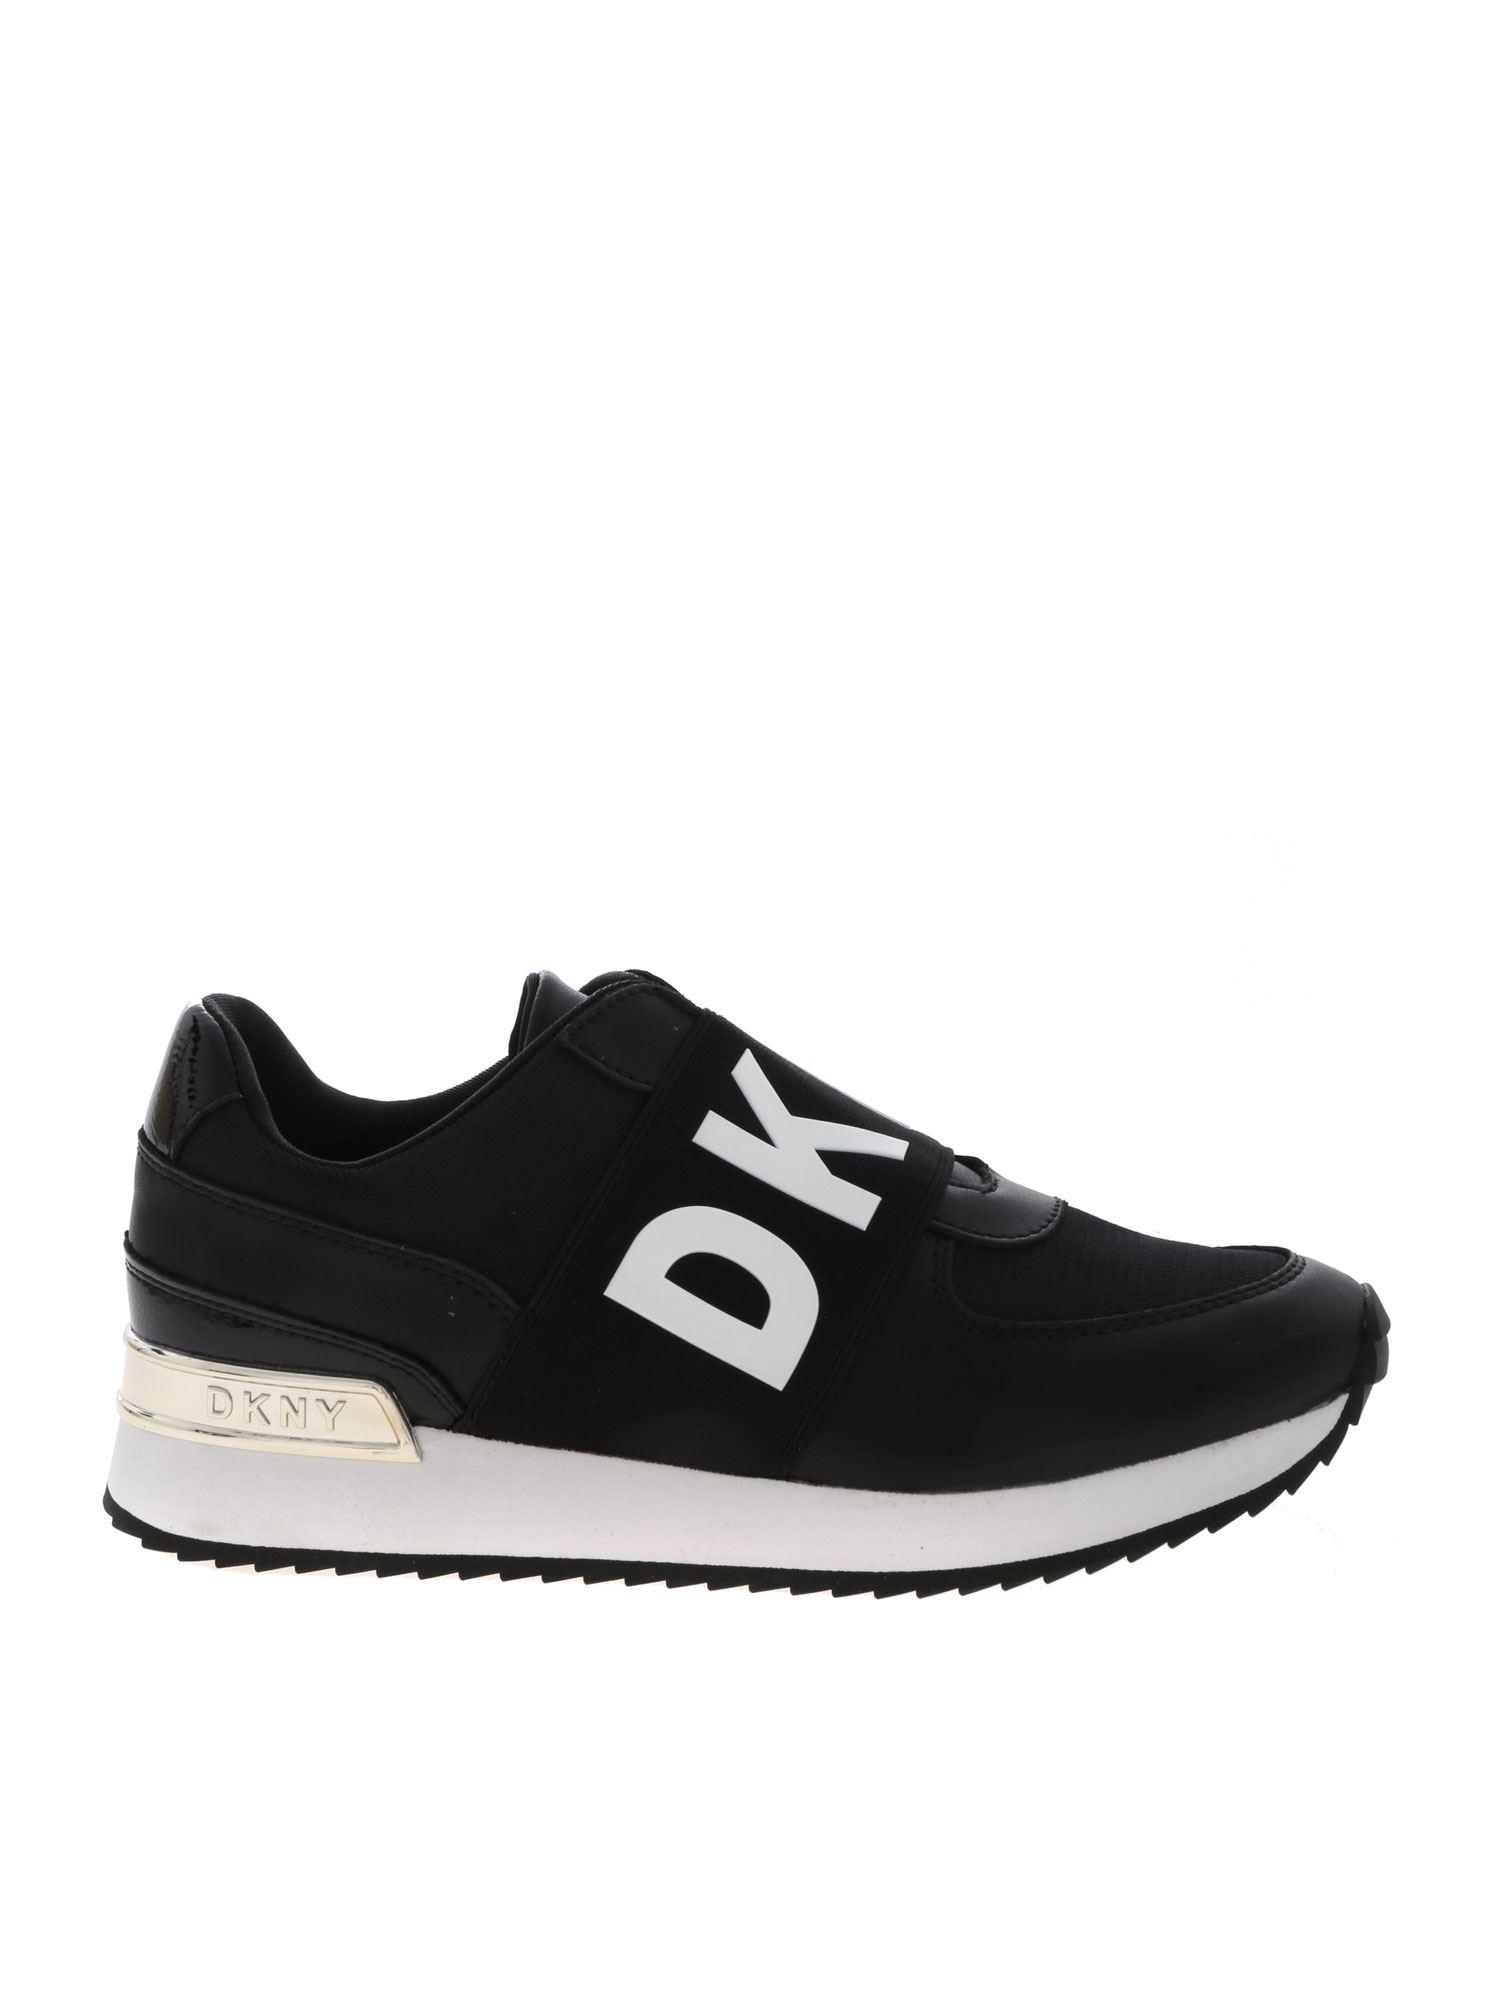 DKNY Sneakers For Women On Sale in Black - Save 19% - Lyst